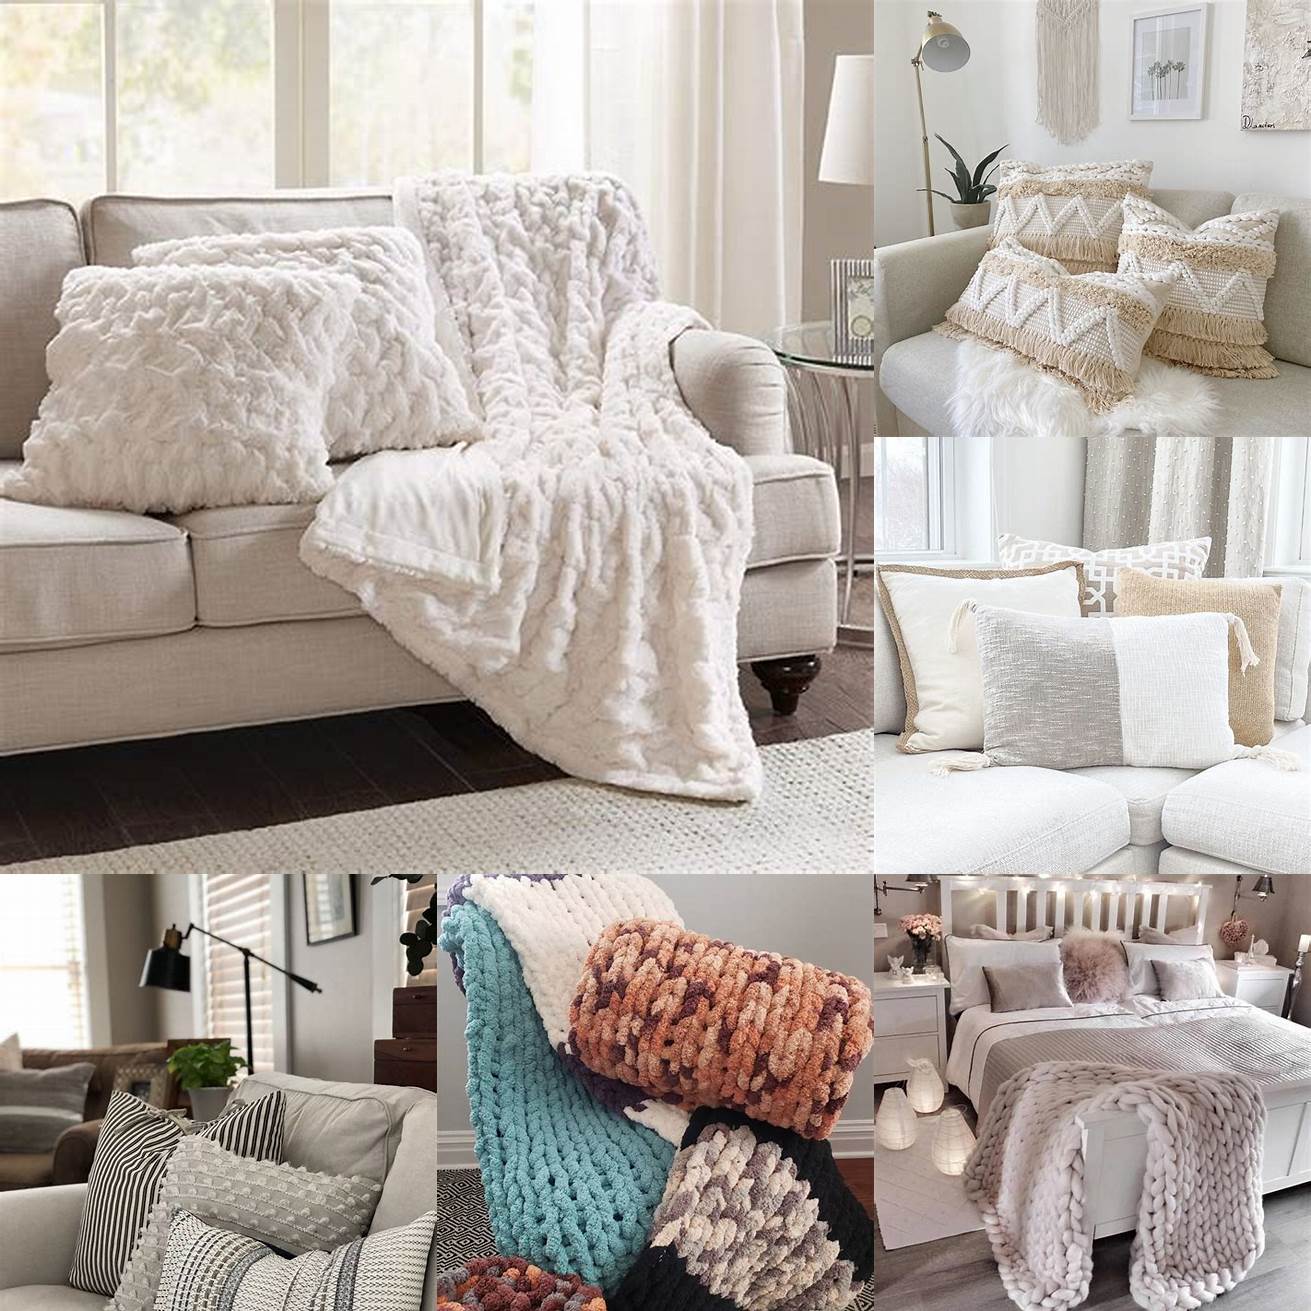 Add throw pillows and blankets to make it more cozy